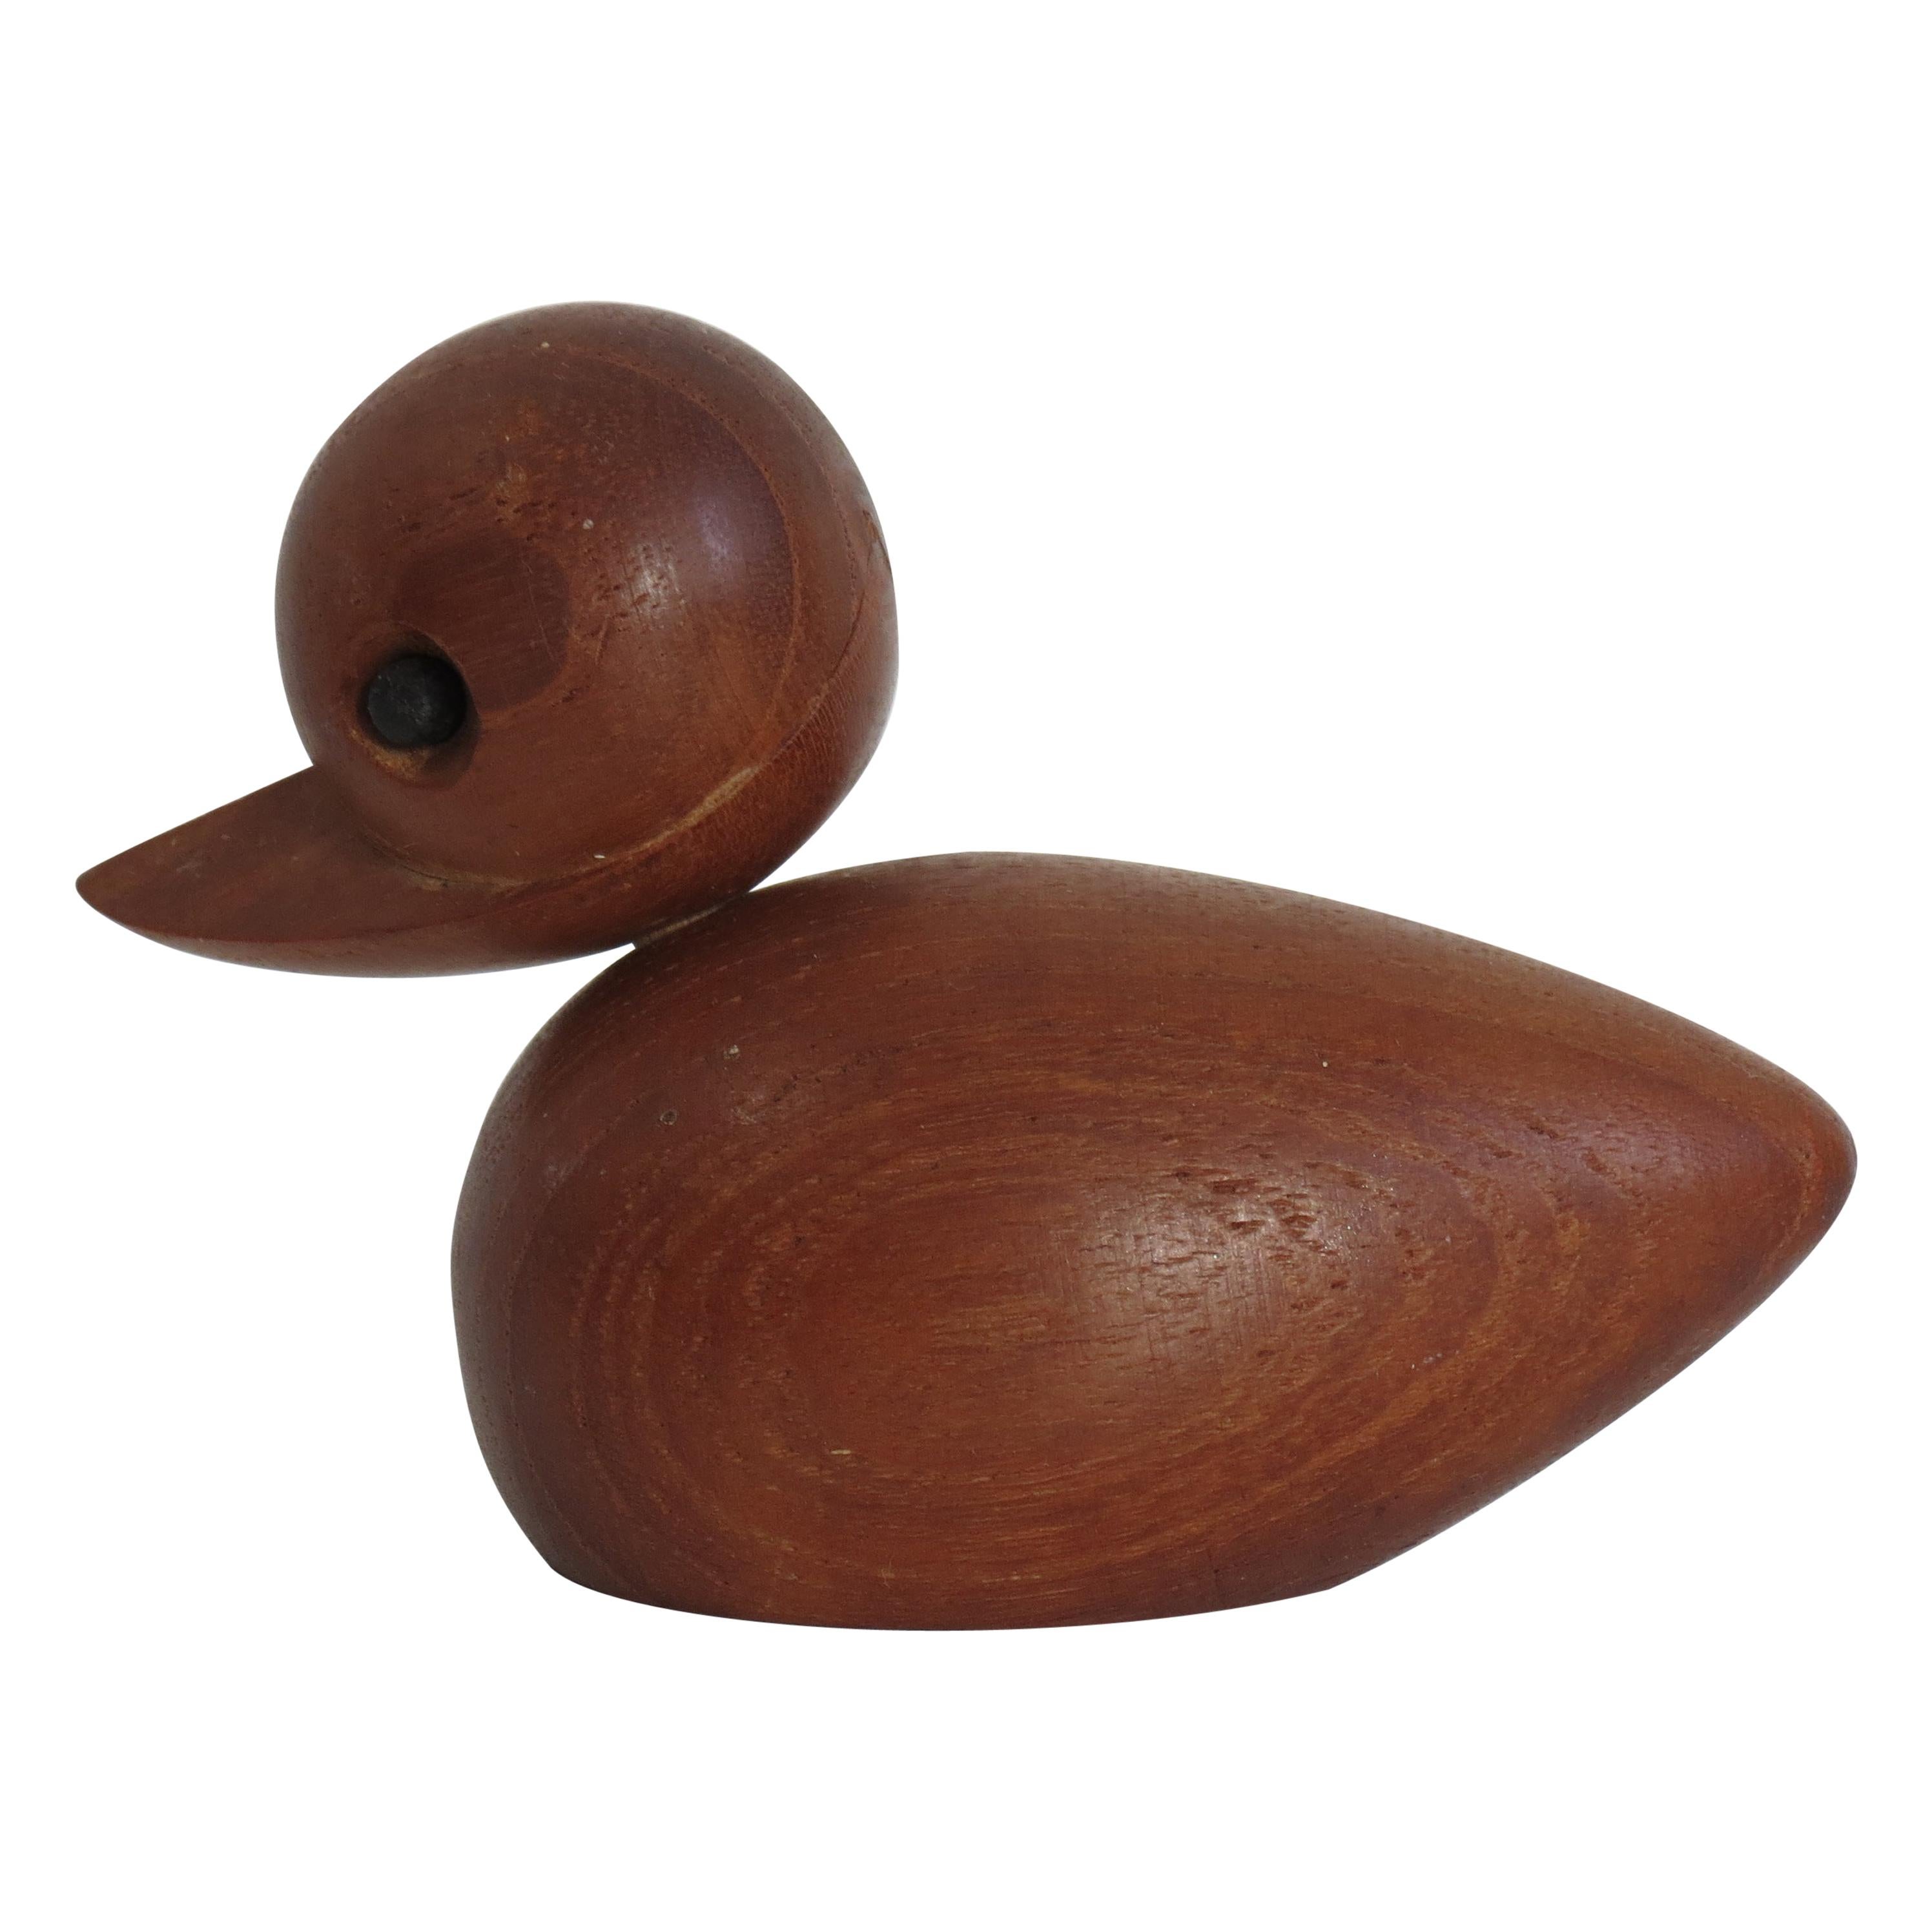 Vintage Teak Wooden Toy Duck by Empire 1960s Hans Bollinger Style